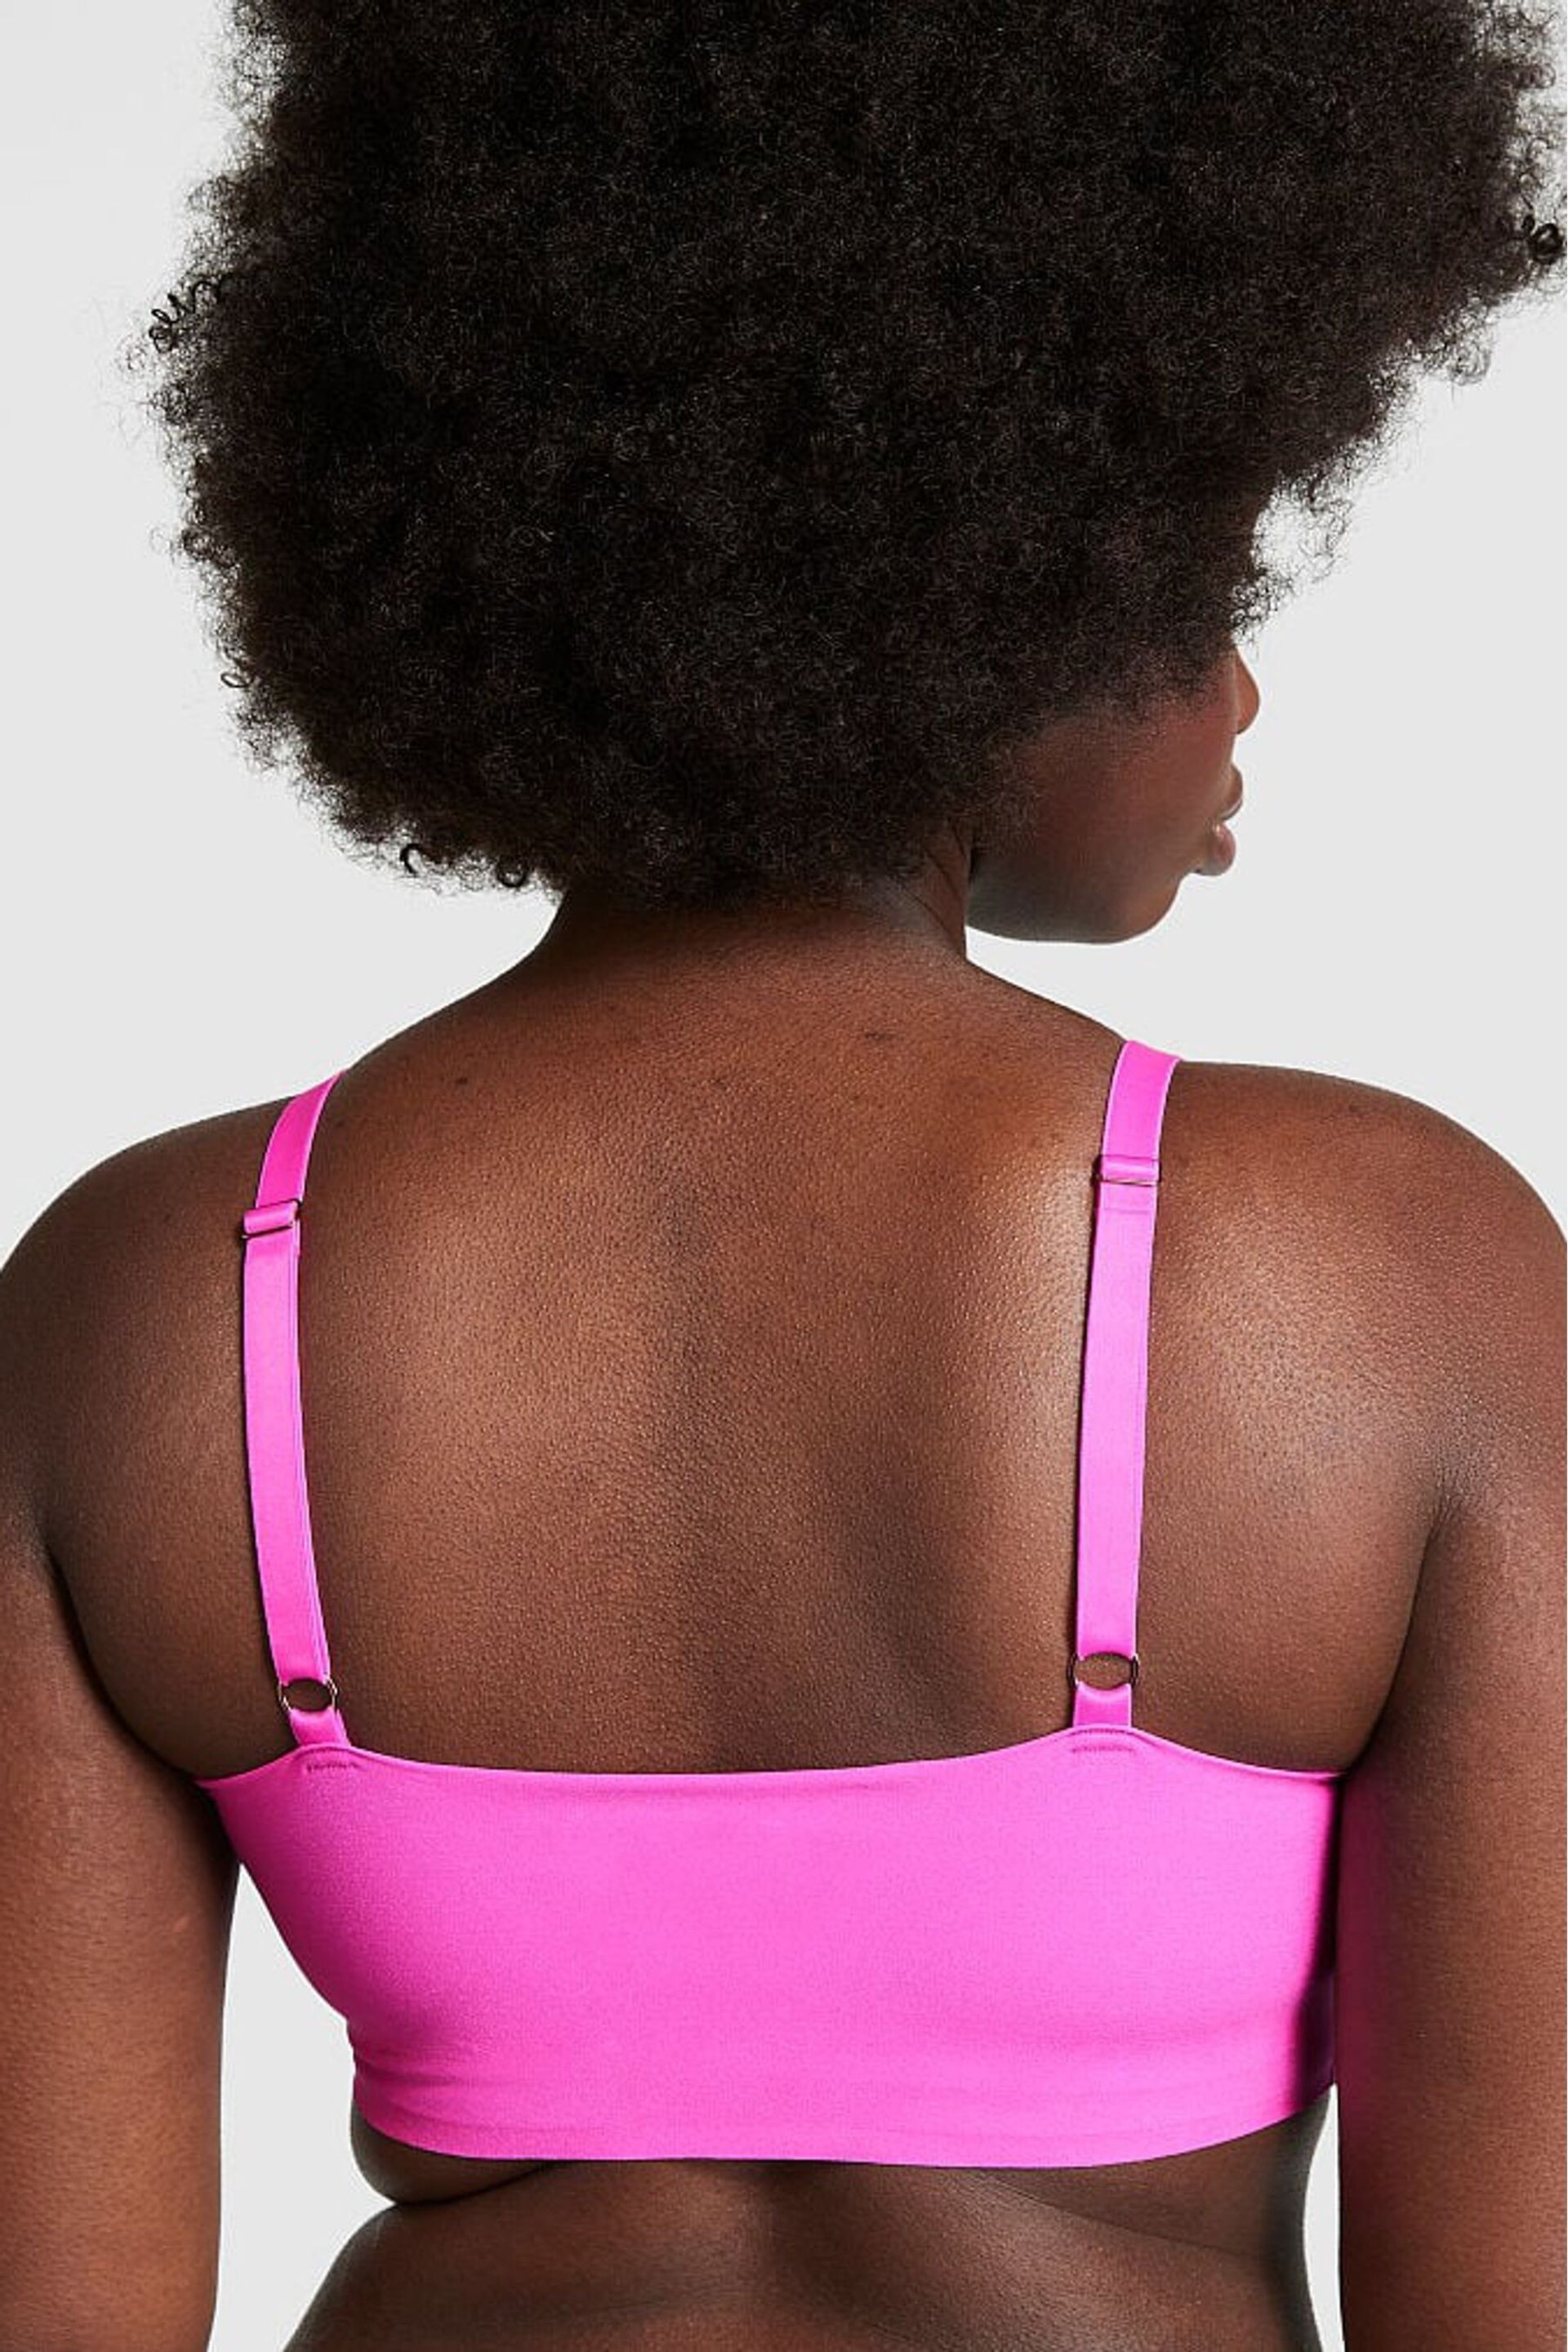 Victoria's Secret PINK Pink Berry Smooth Non Wired Push Up Bralette - Image 2 of 3